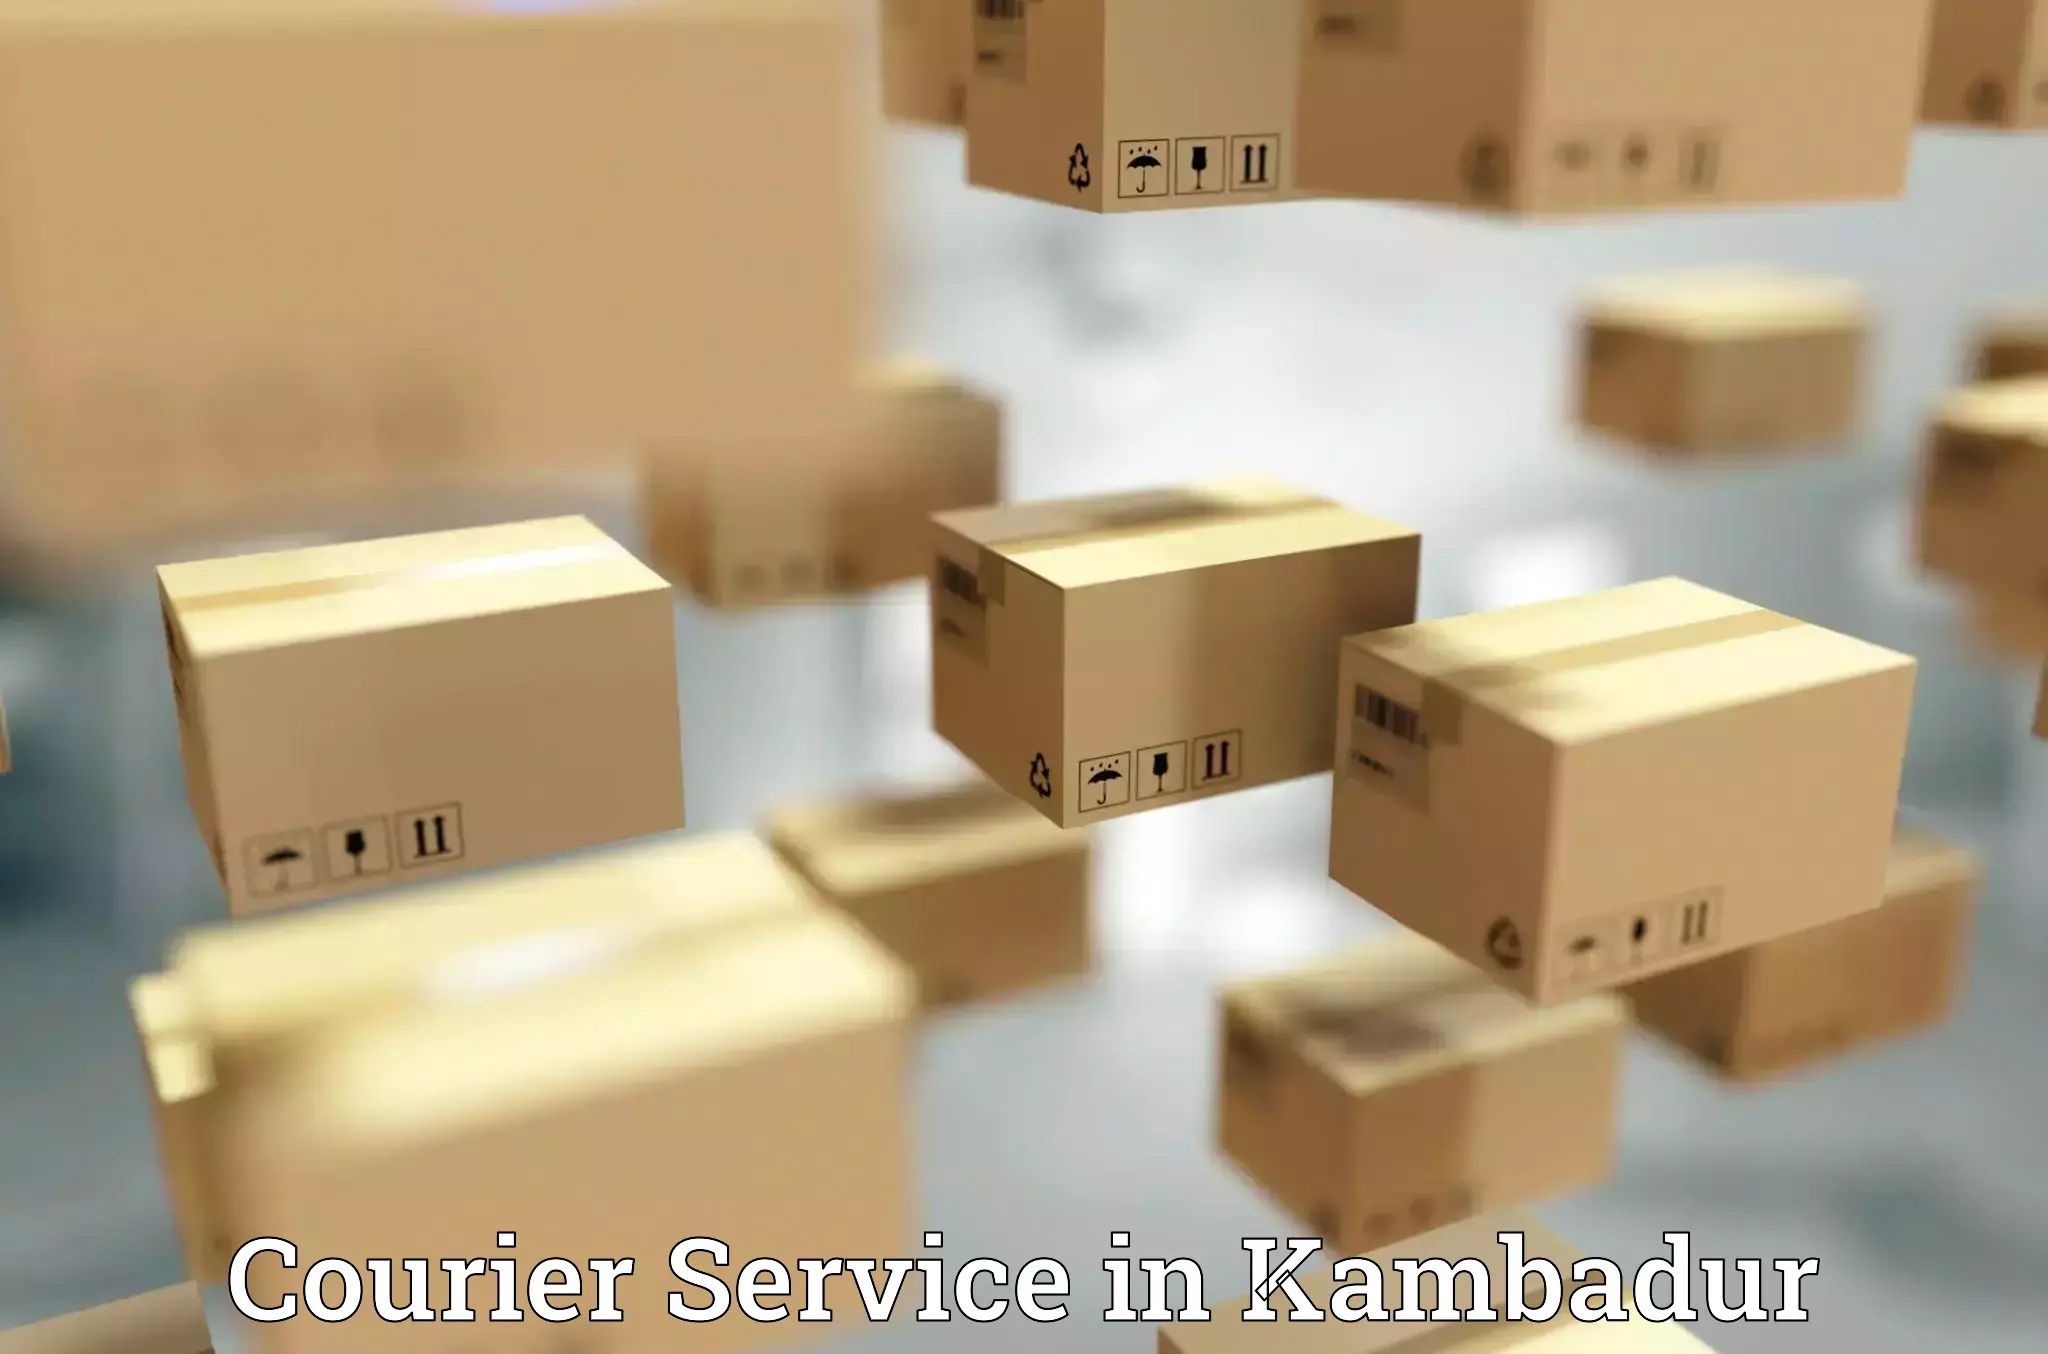 Nationwide delivery network in Kambadur